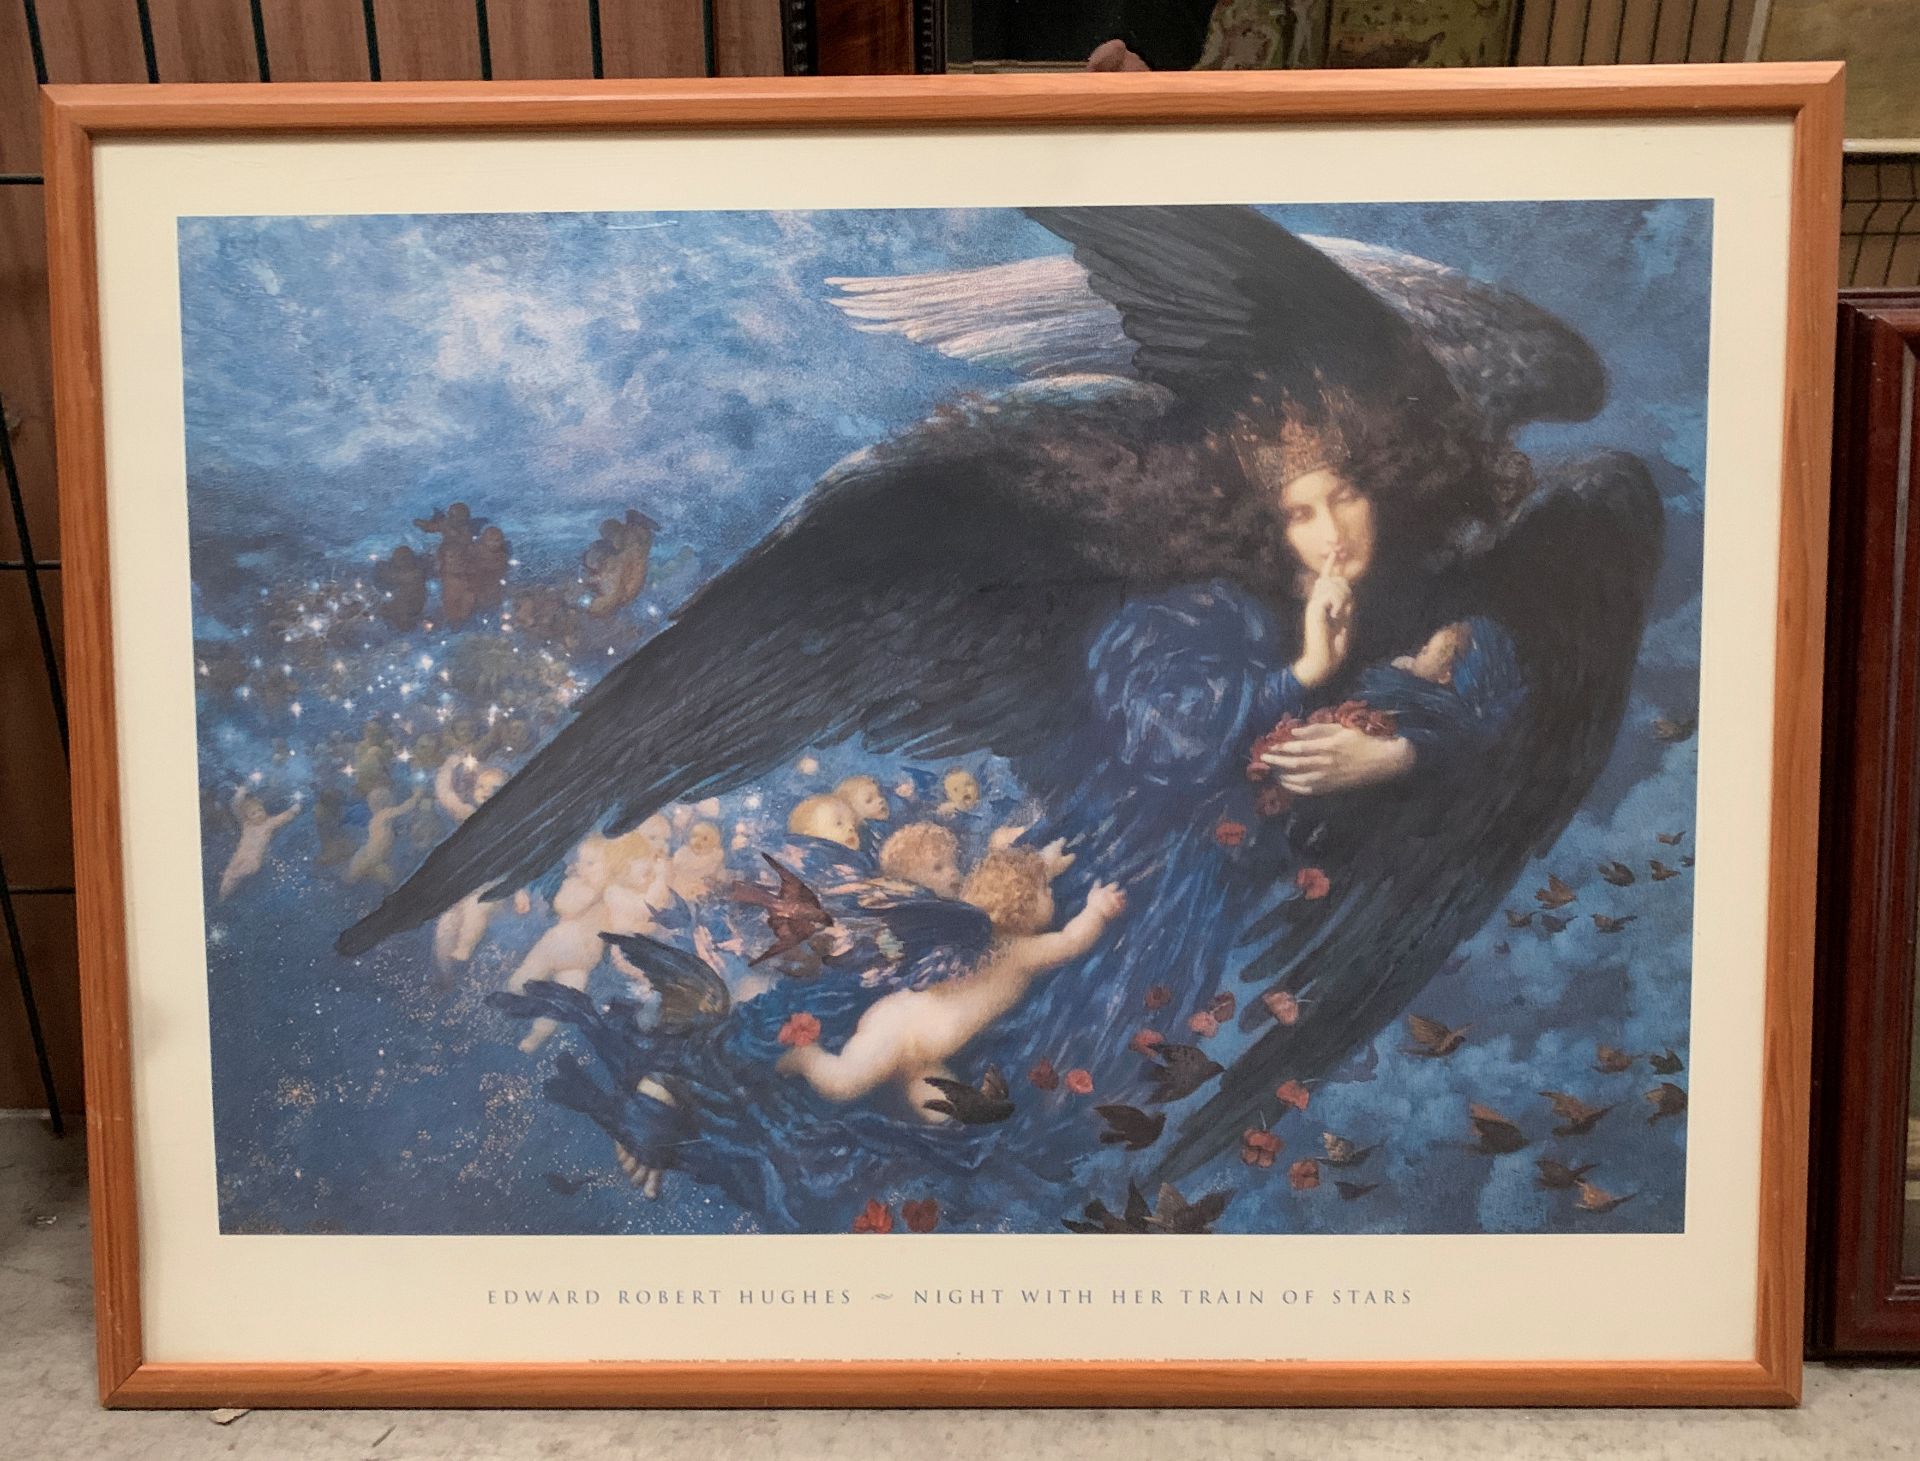 Edward Robert Hughes large framed print 'Night with her train of stars' 60 x 80cm and a framed - Image 2 of 3